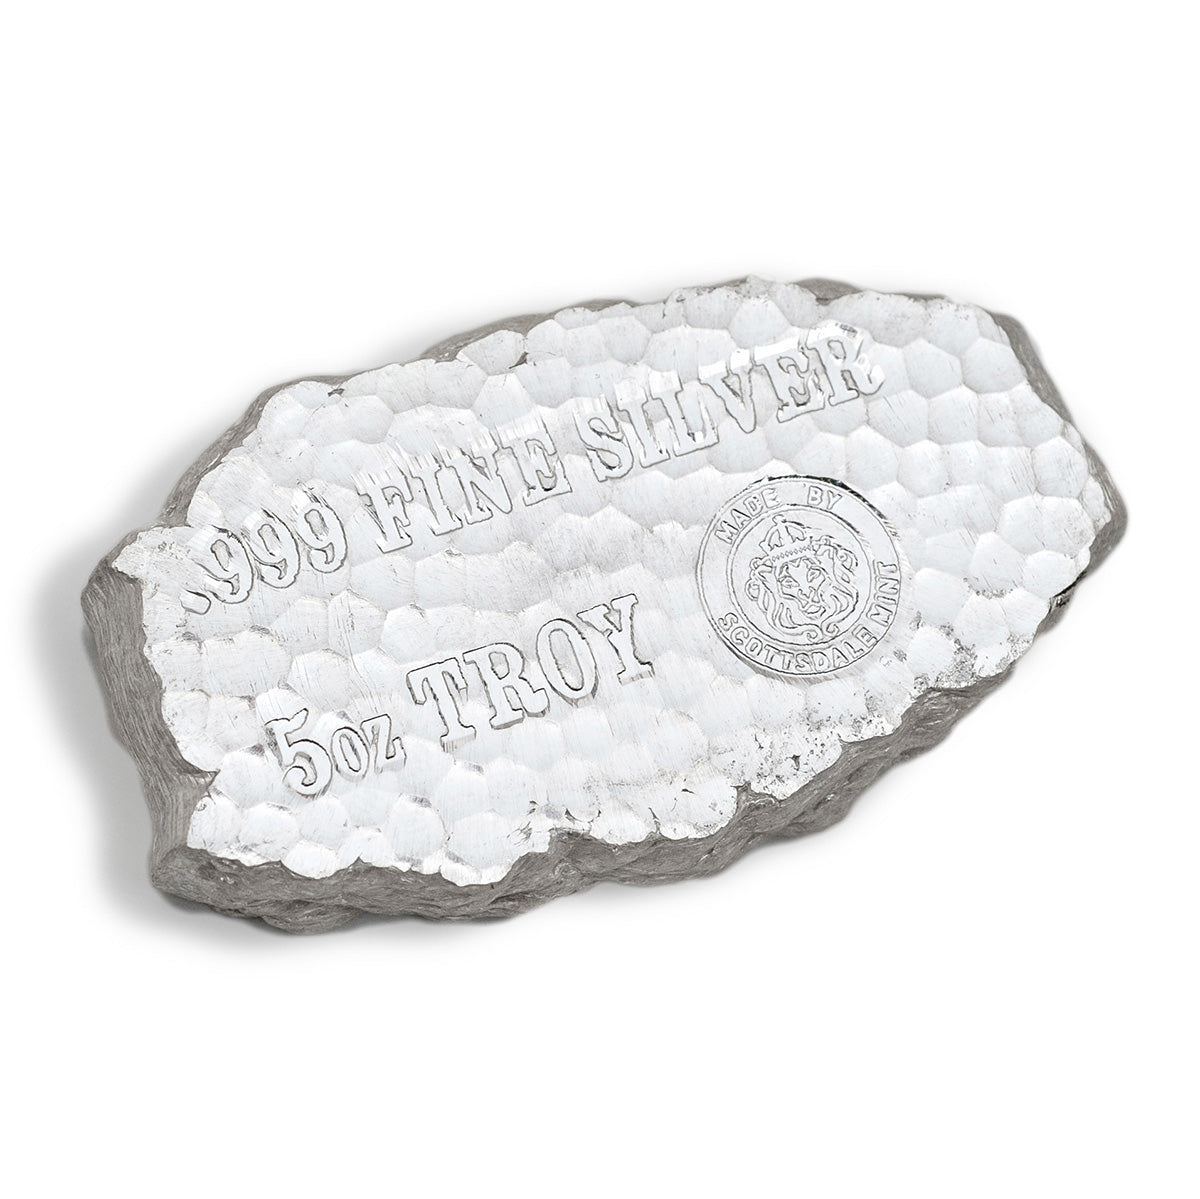 Scottsdale Tombstone Nugget 5 oz Silver Bar